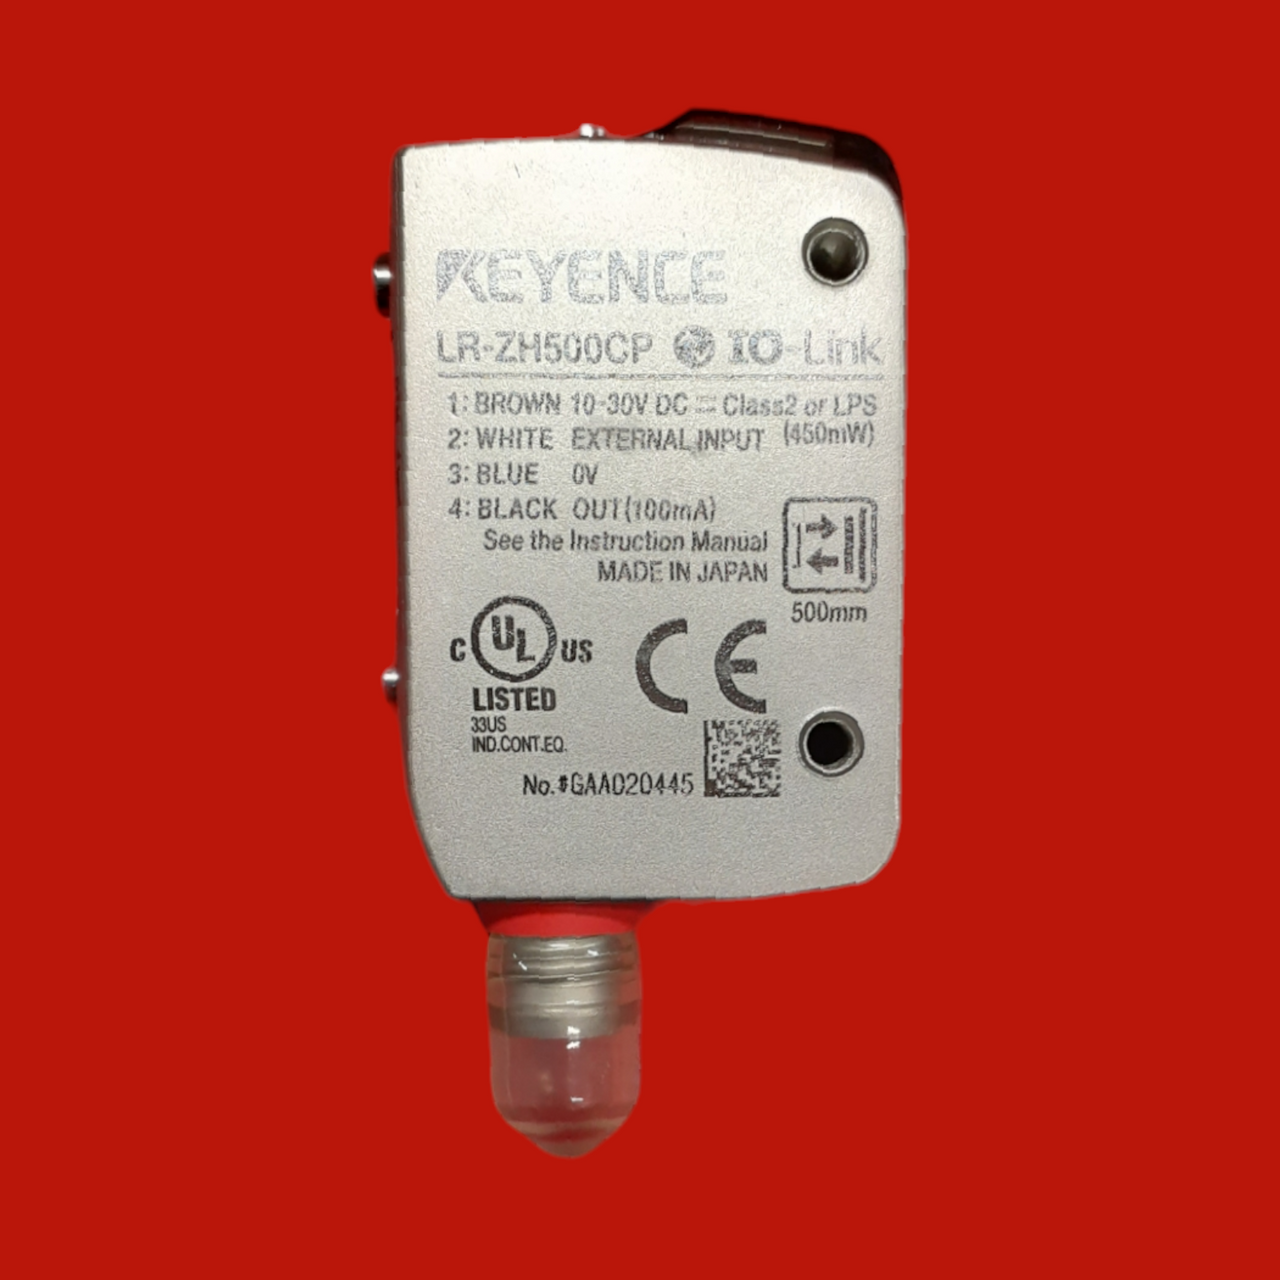 Keyence LR-ZH500CP Self-Contained CMOS Laser Sensor